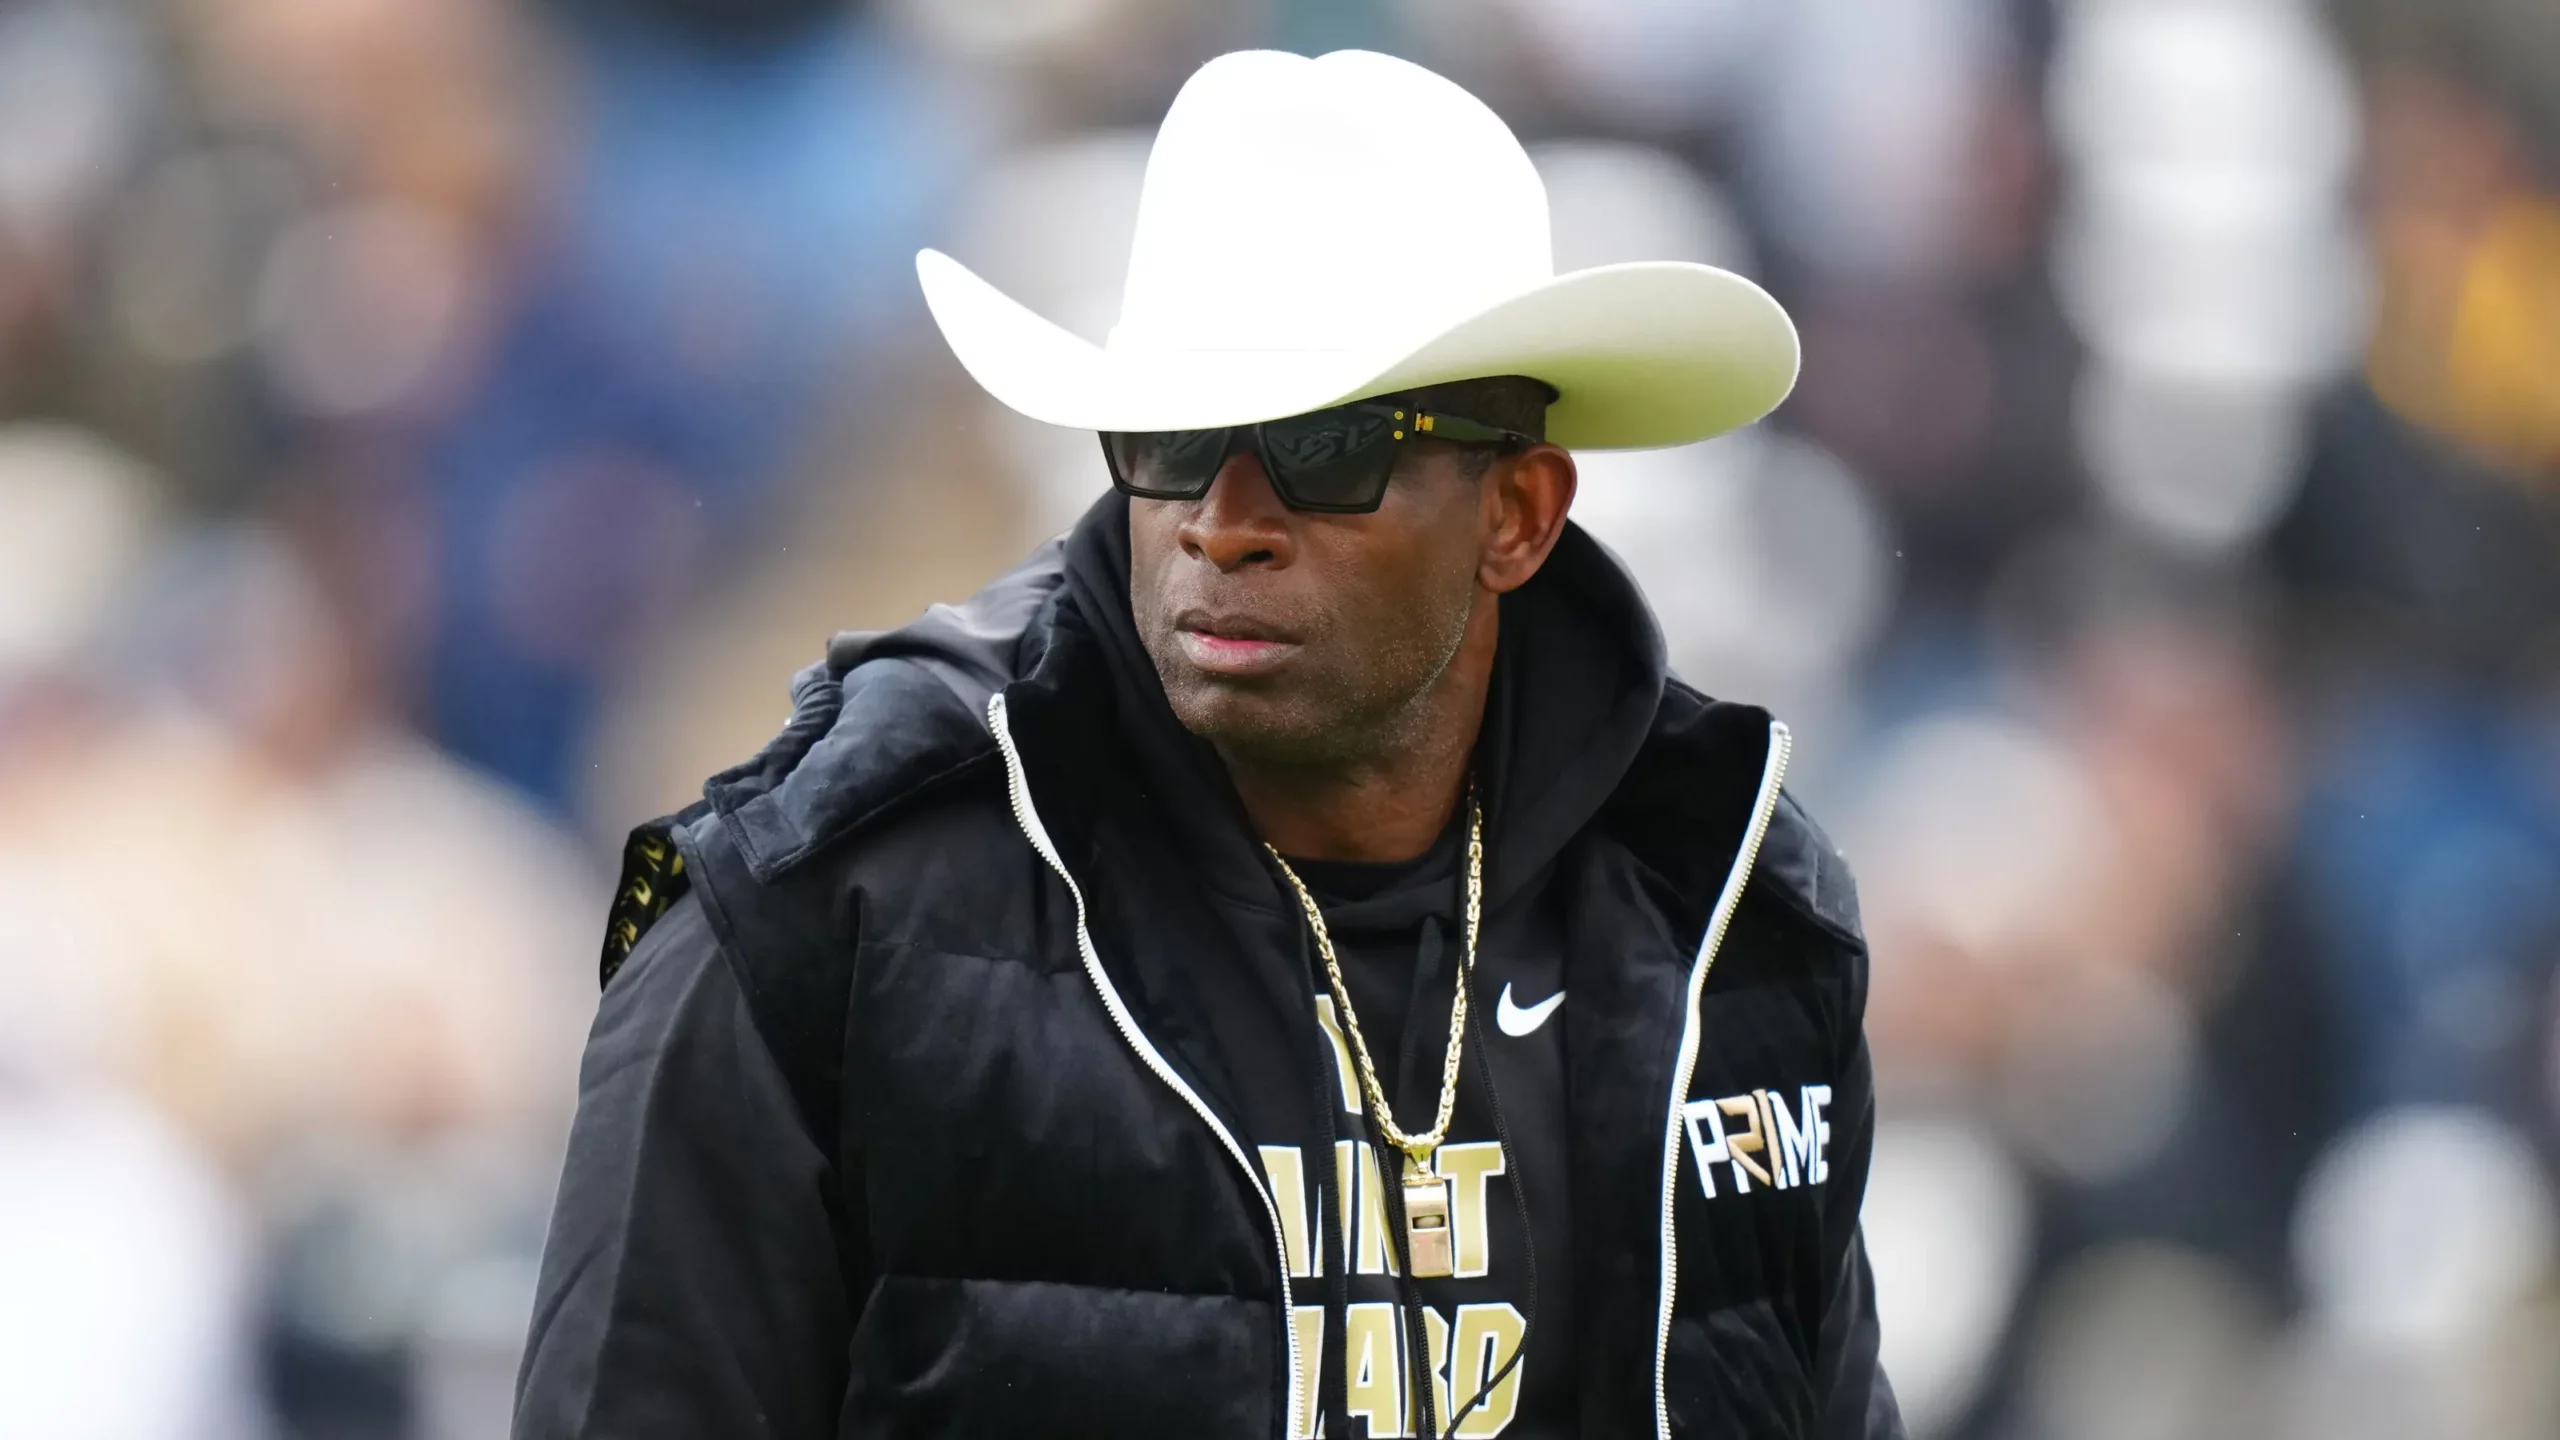 Deion Sanders of Colorado responds to claims of nepotism and sends a message to his detractors (5)